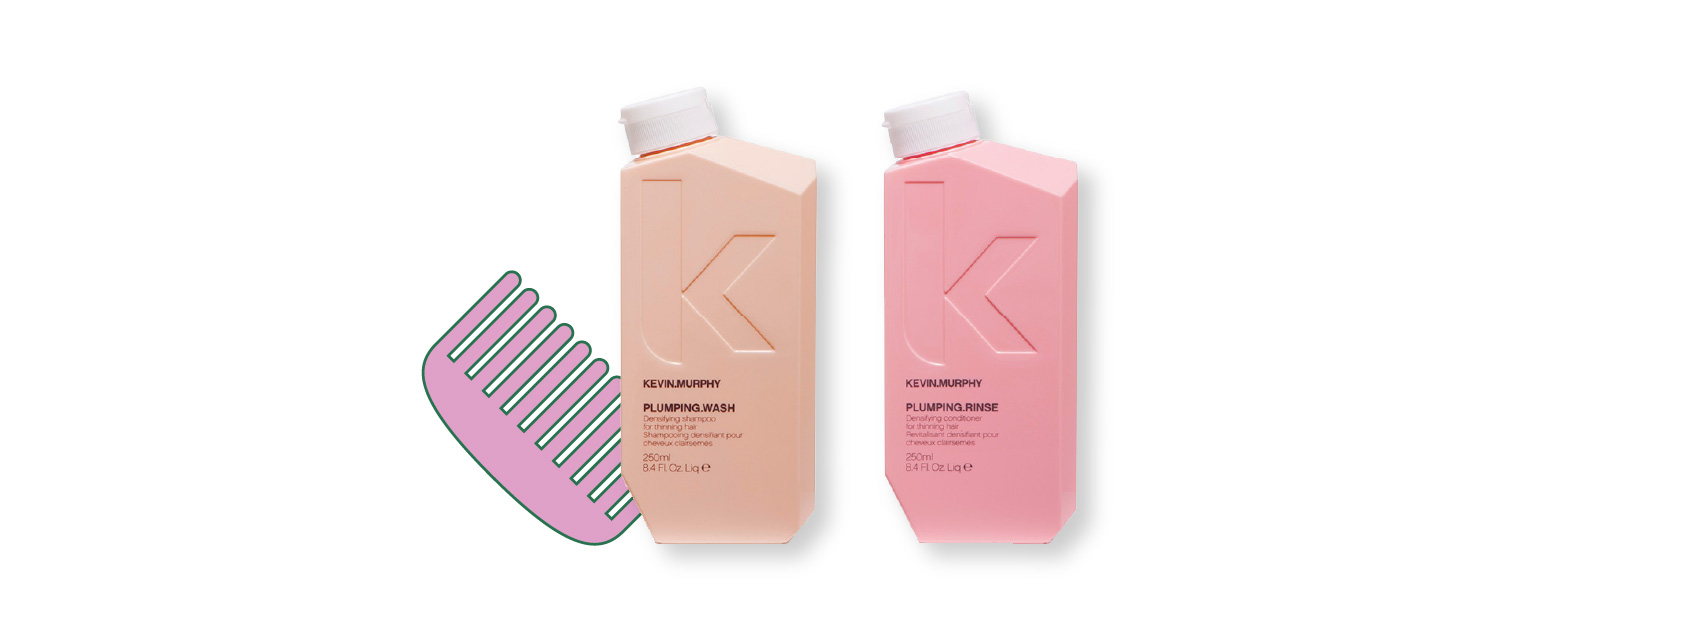 bottles of plumping wash and plumping rinse by kevin murphy with an illustration of a comb